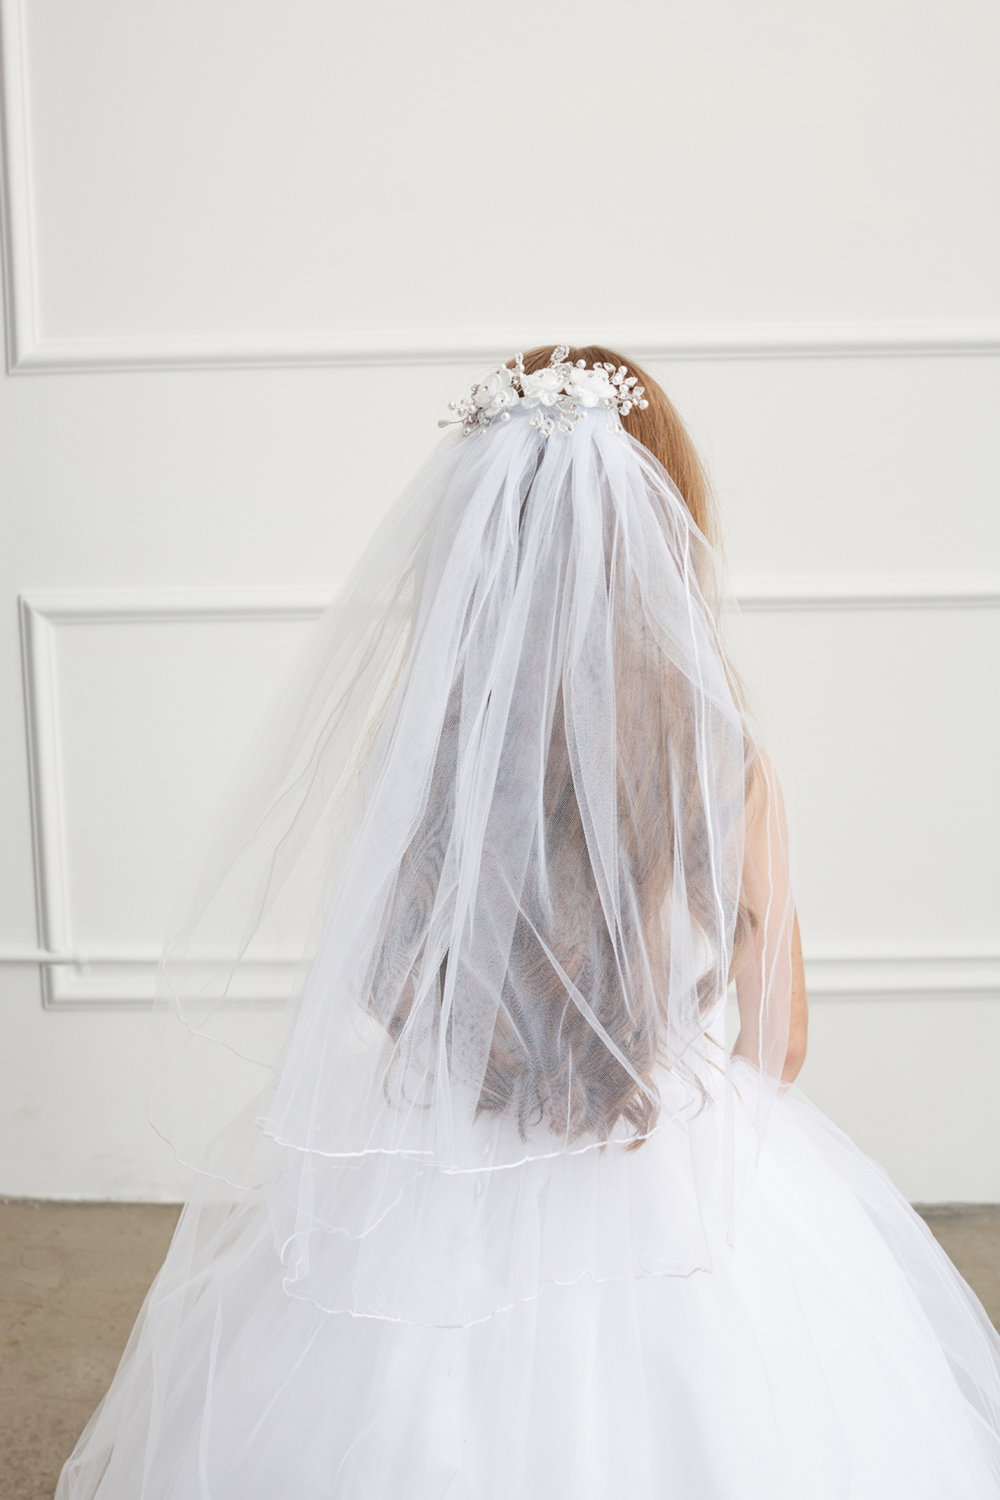 First Communion Veil with Crystals and Organza Flowers on Comb